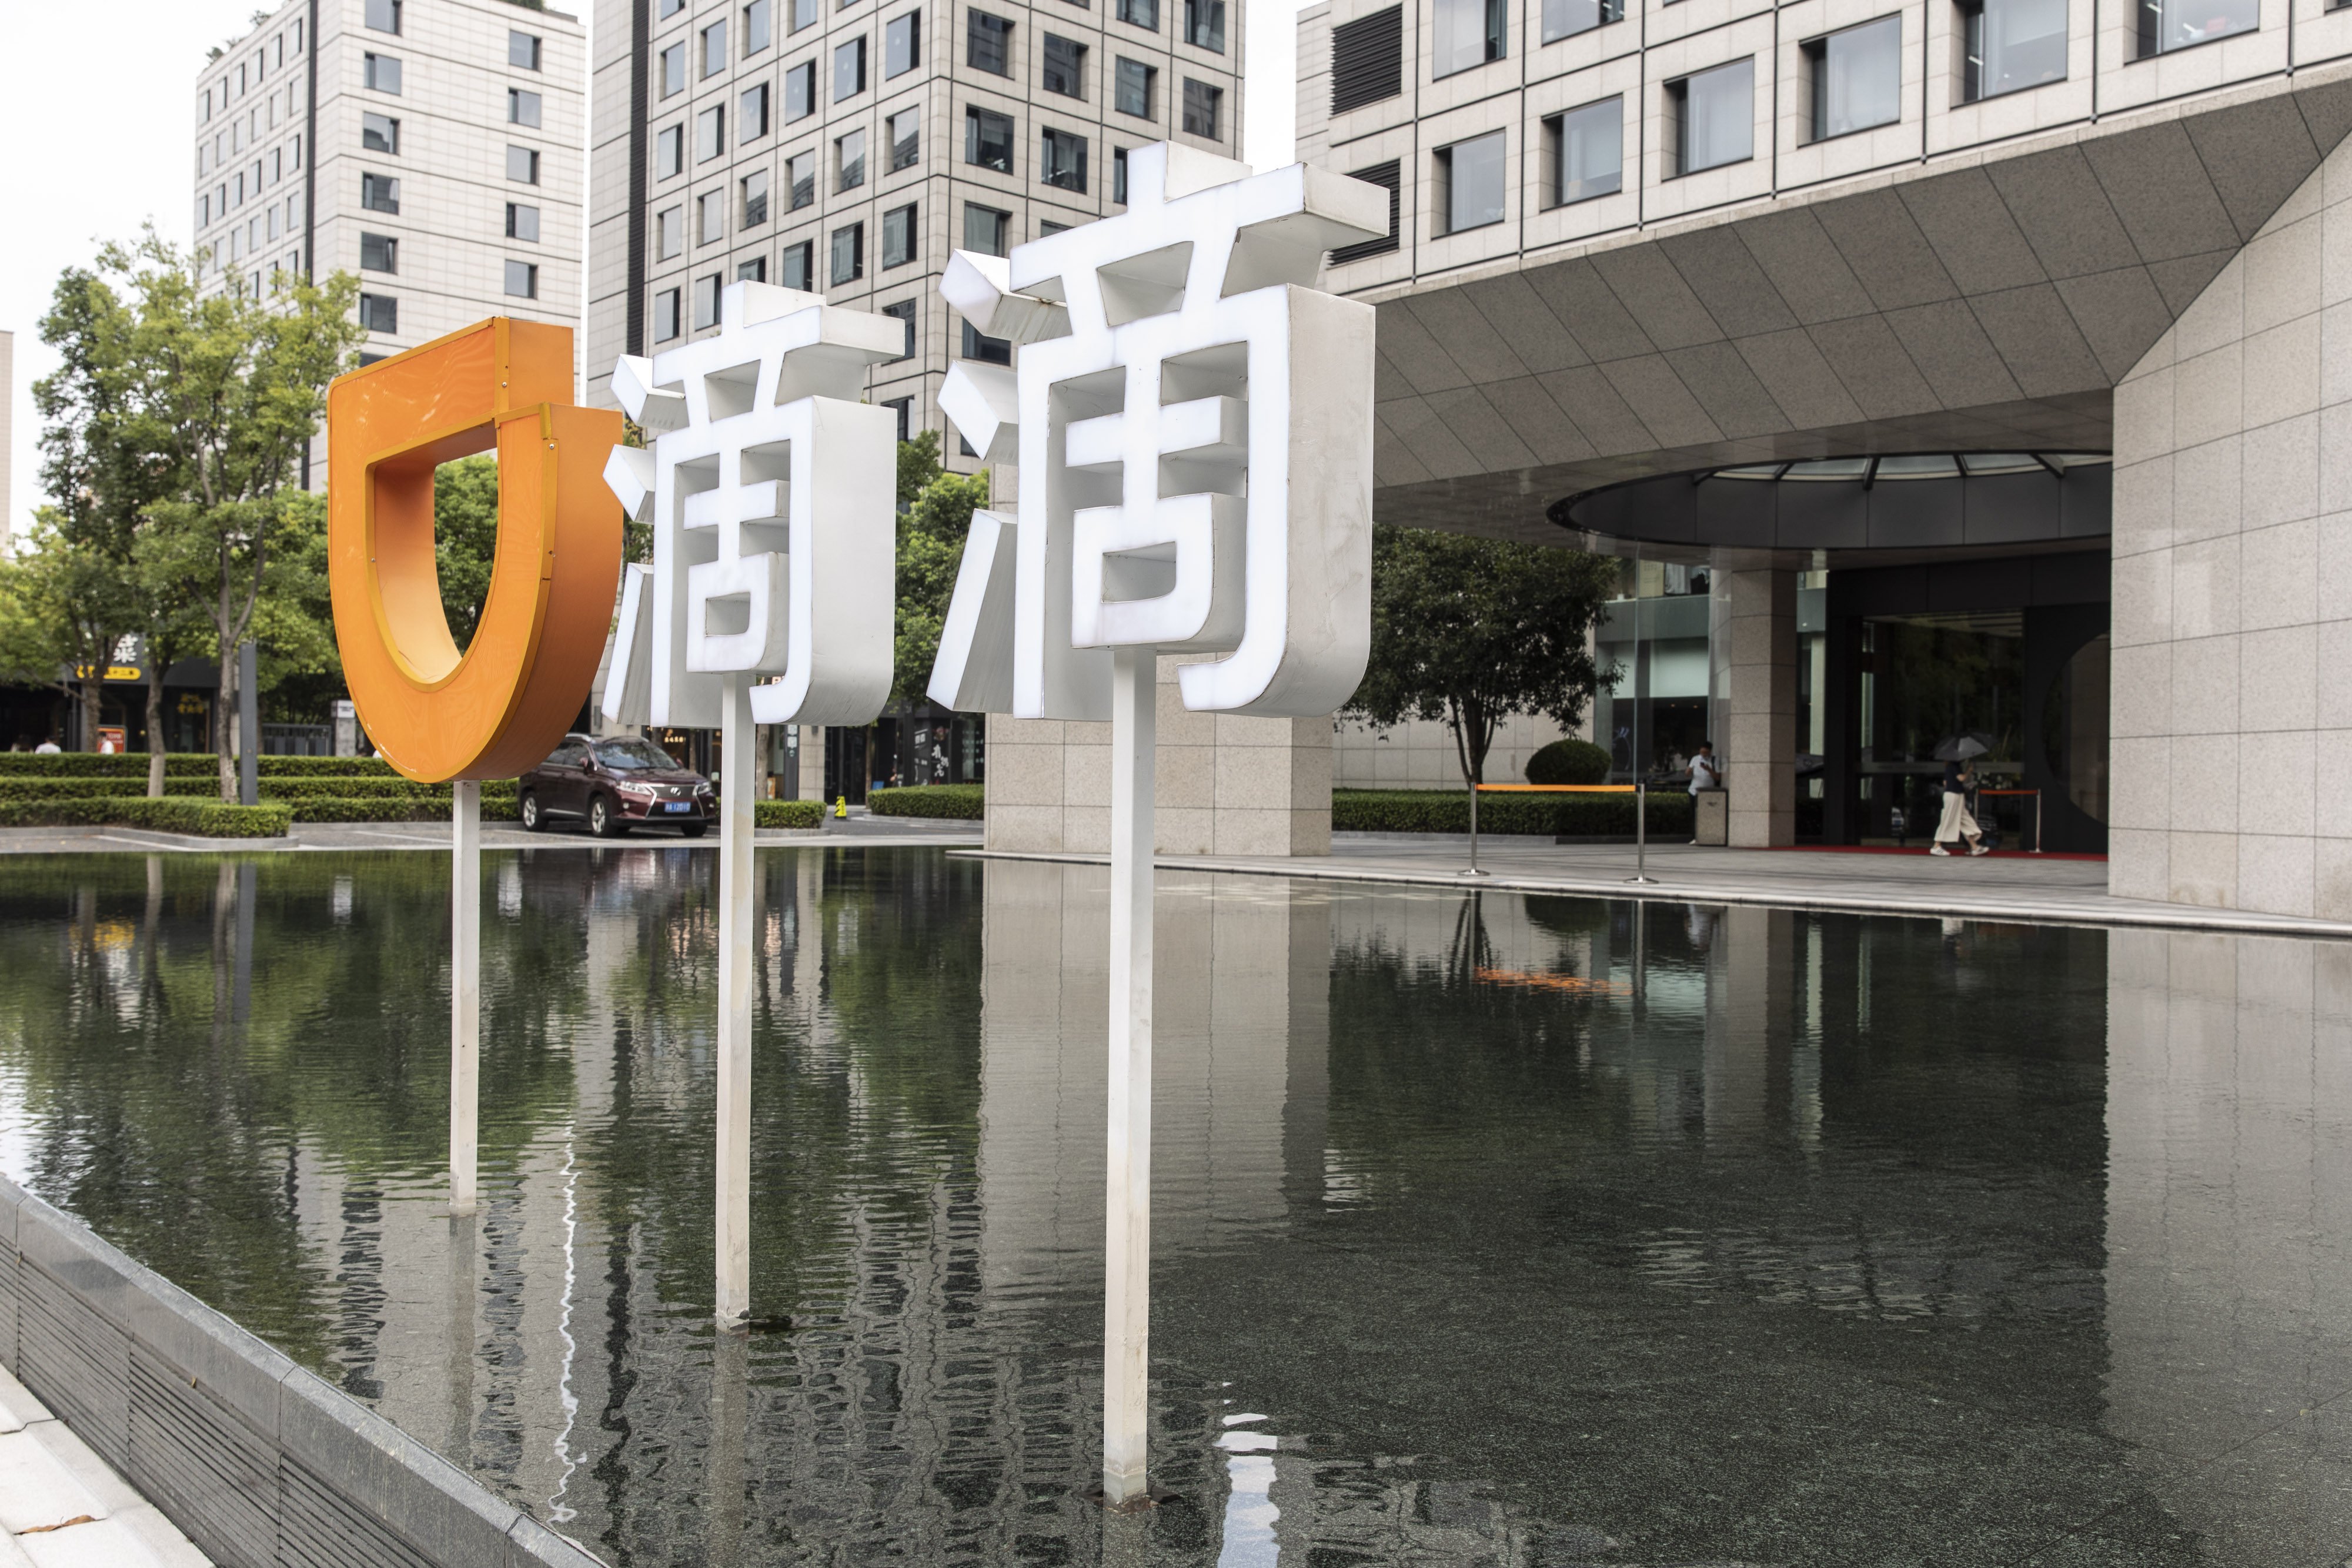 A short ban on ride-hailing services at Shanghai Pudong International Airport has heightened concerns regulatory overreach may stem private sector confidence. Photo: Bloomberg